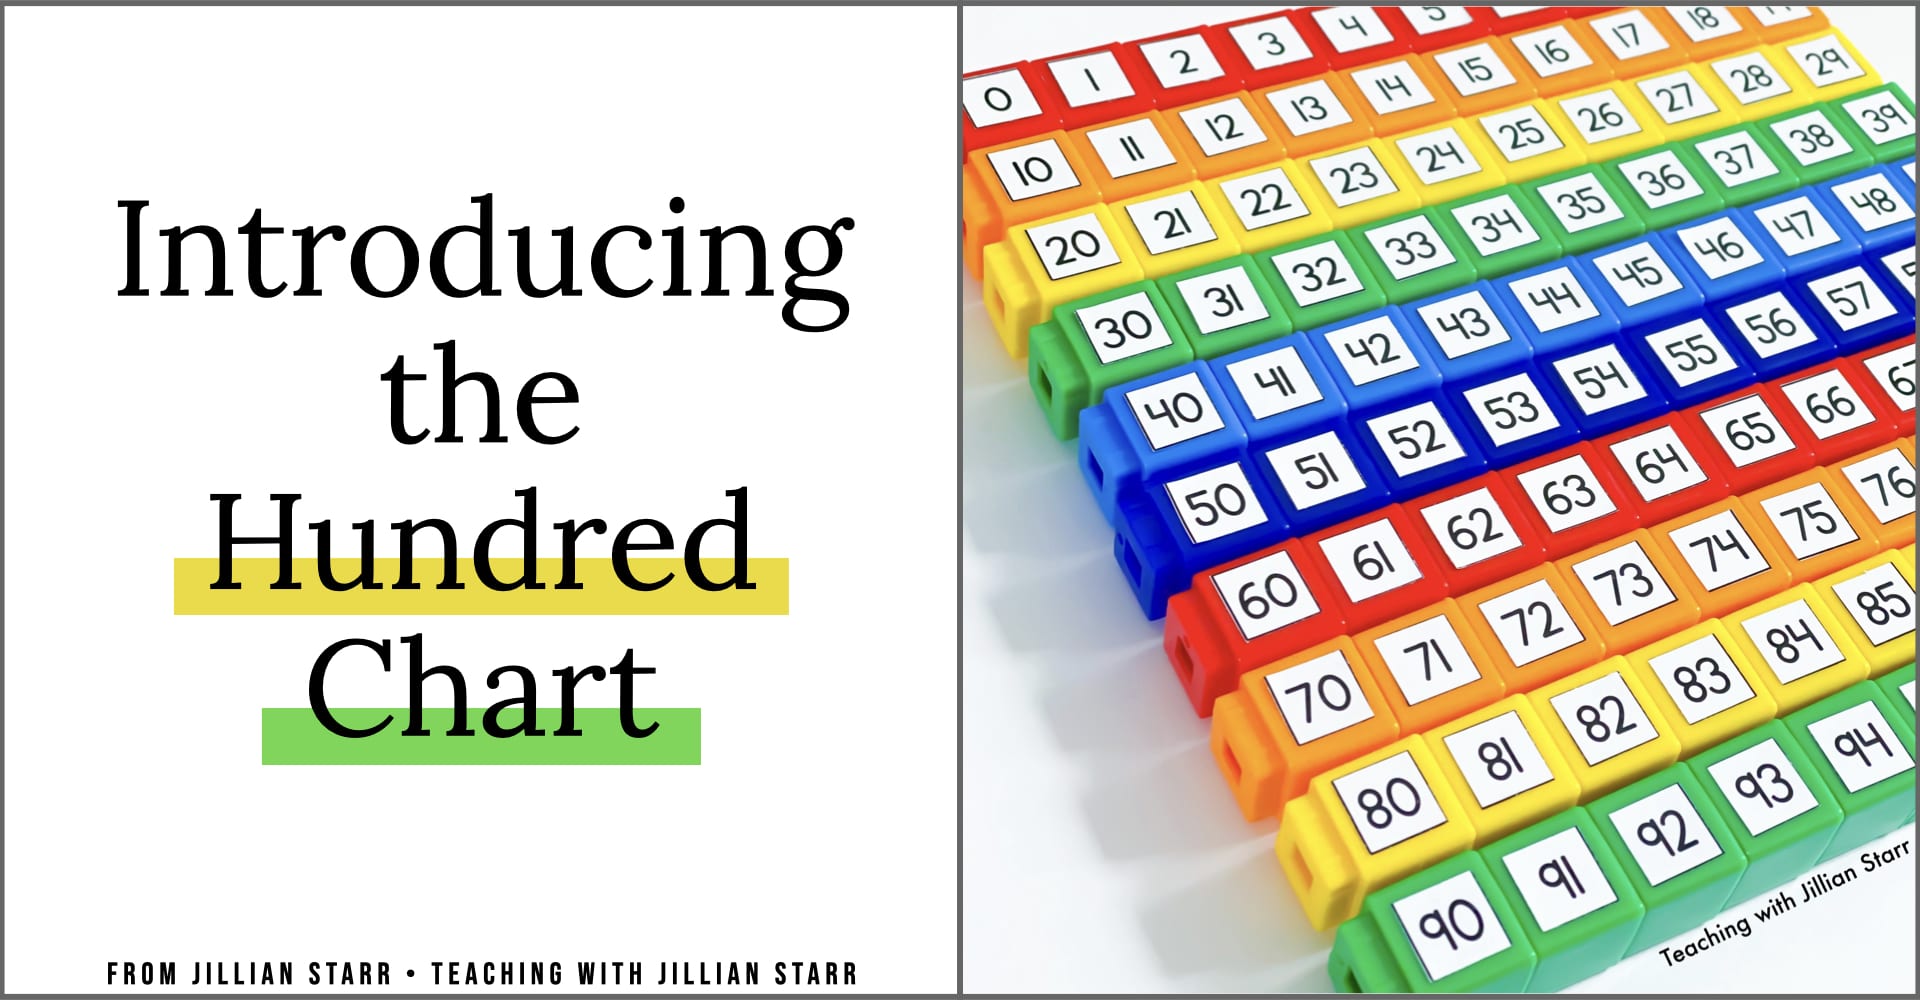 Introducing the Hundred Chart to help students move from concrete to abstract undertanding!